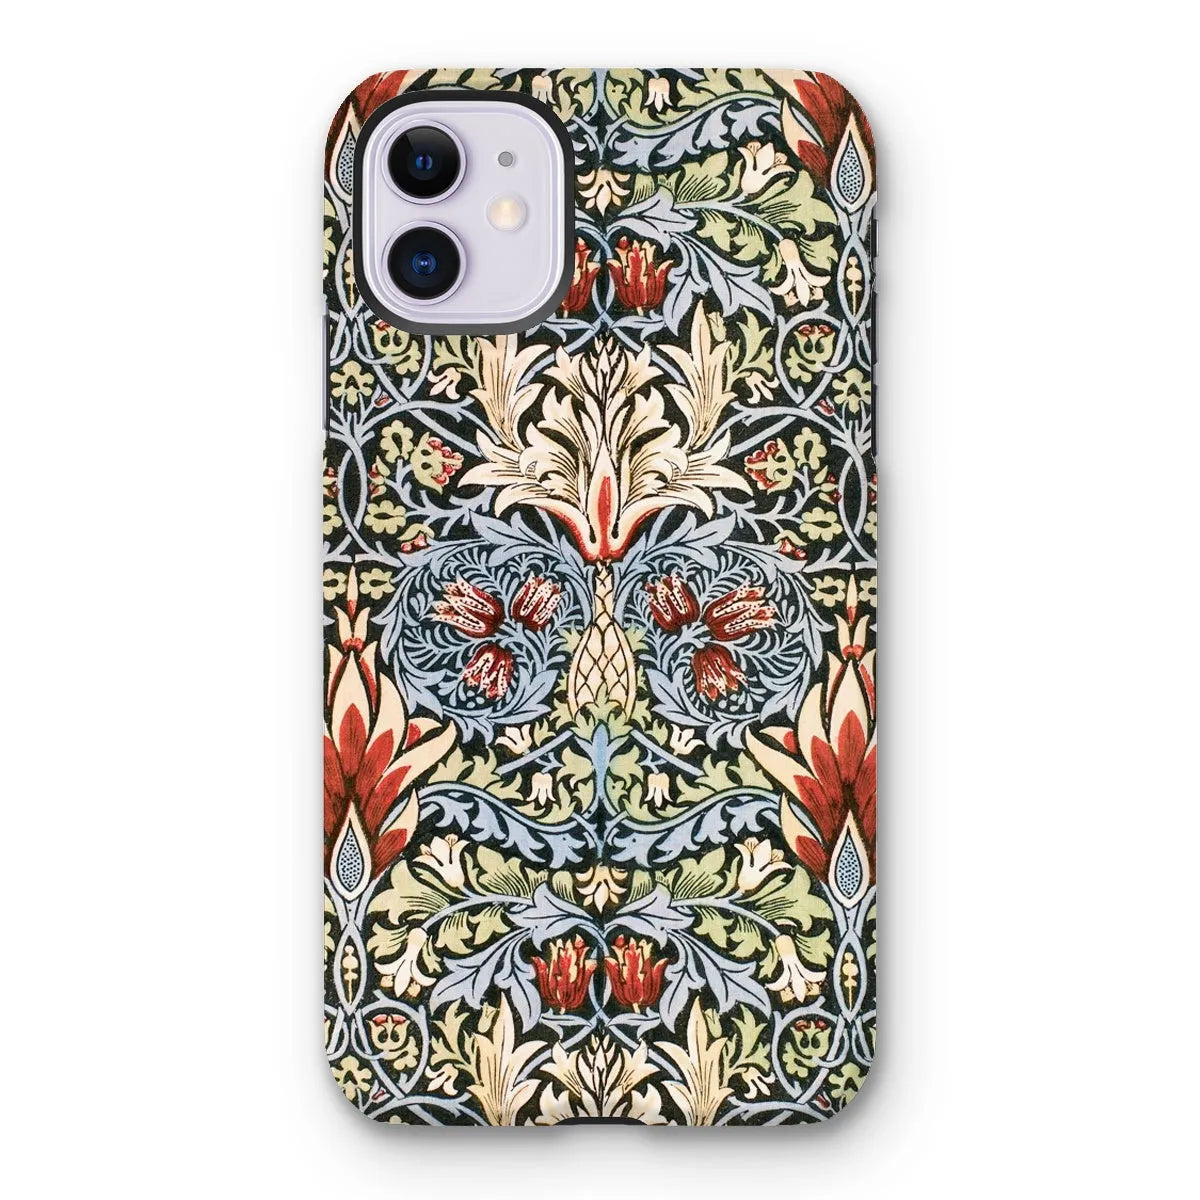 Snakeshead - Arts And Crafts Pattern Phone Case - William Morris - Iphone 11 / Matte - Mobile Phone Cases - Aesthetic